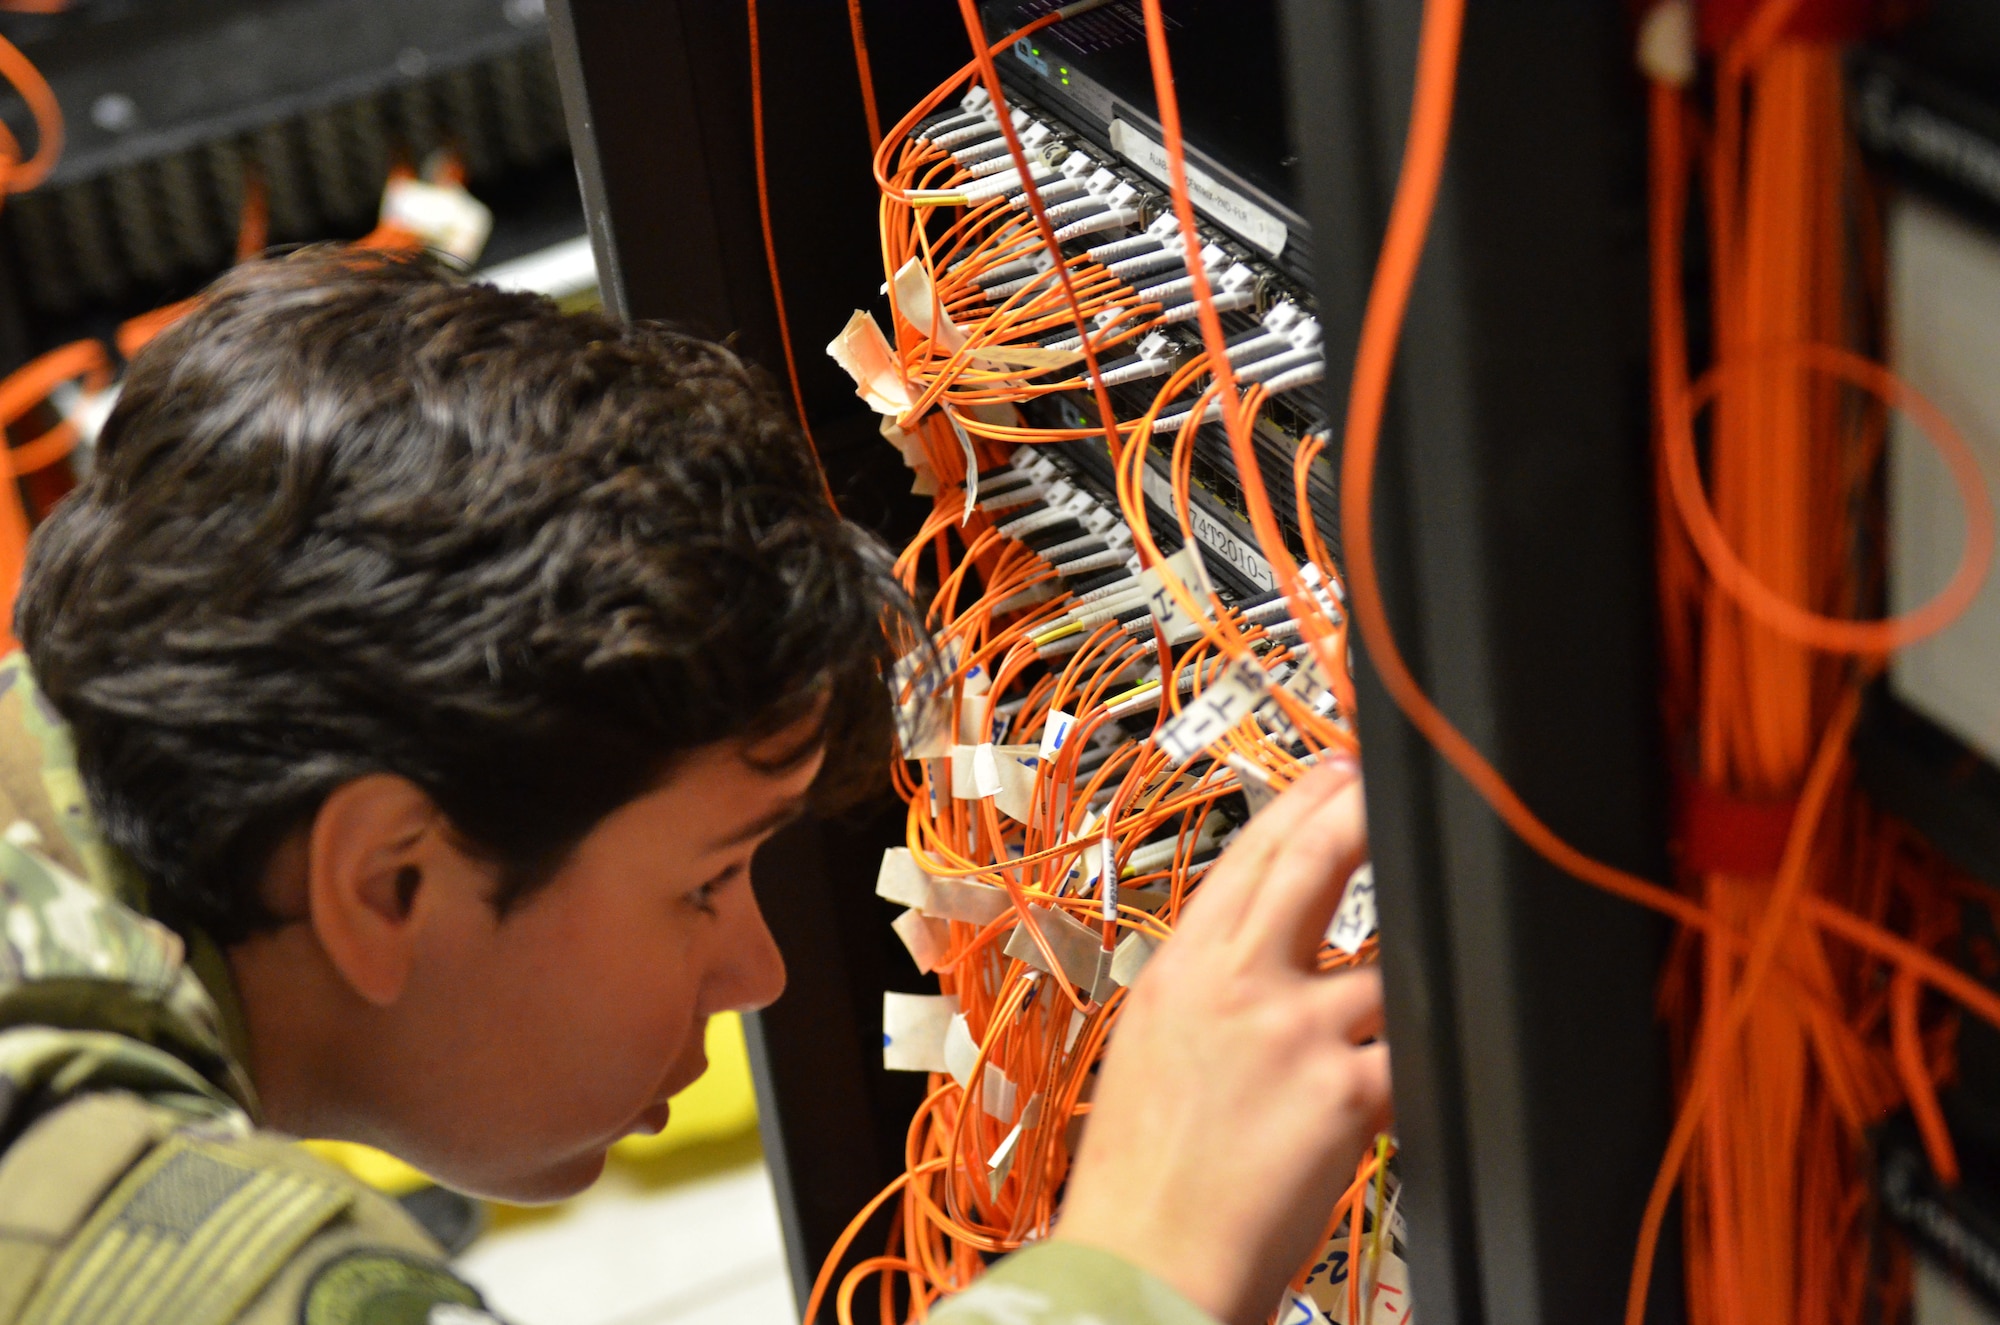 Airman 1st Class Courtney Sherman, a cyber transport technicians assigned to the 609th Expeditionary Air Communications Squadron (EACOMS), traces a fiber cable from a user’s computer to a specific network switch Aug. 8, 2018, at Al Udeid Air Base, Qatar. The 609th EACOMS is the sole communications support for the Combined Air Operations Center which executes air operation missions for U.S. Central Command across a 20 nation area of responsibility. (U.S. Air Force photo by Staff Sgt. Caitlin Conner)